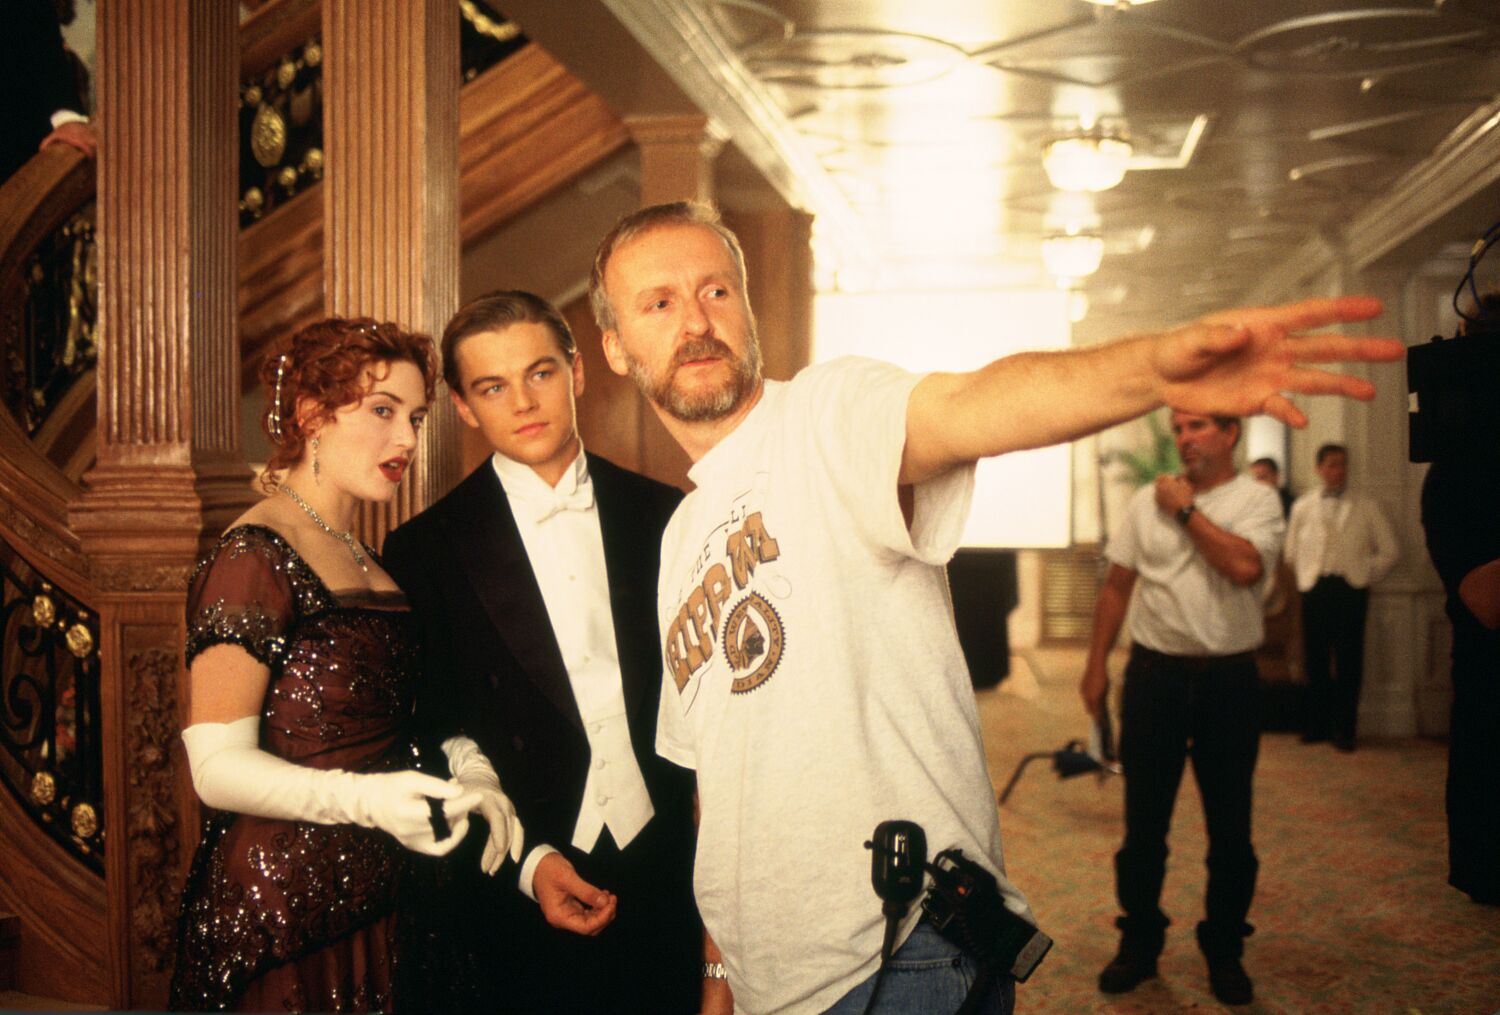 James Cameron tests 'Titanic' theory: Jack could have avoided icy death, if only ...